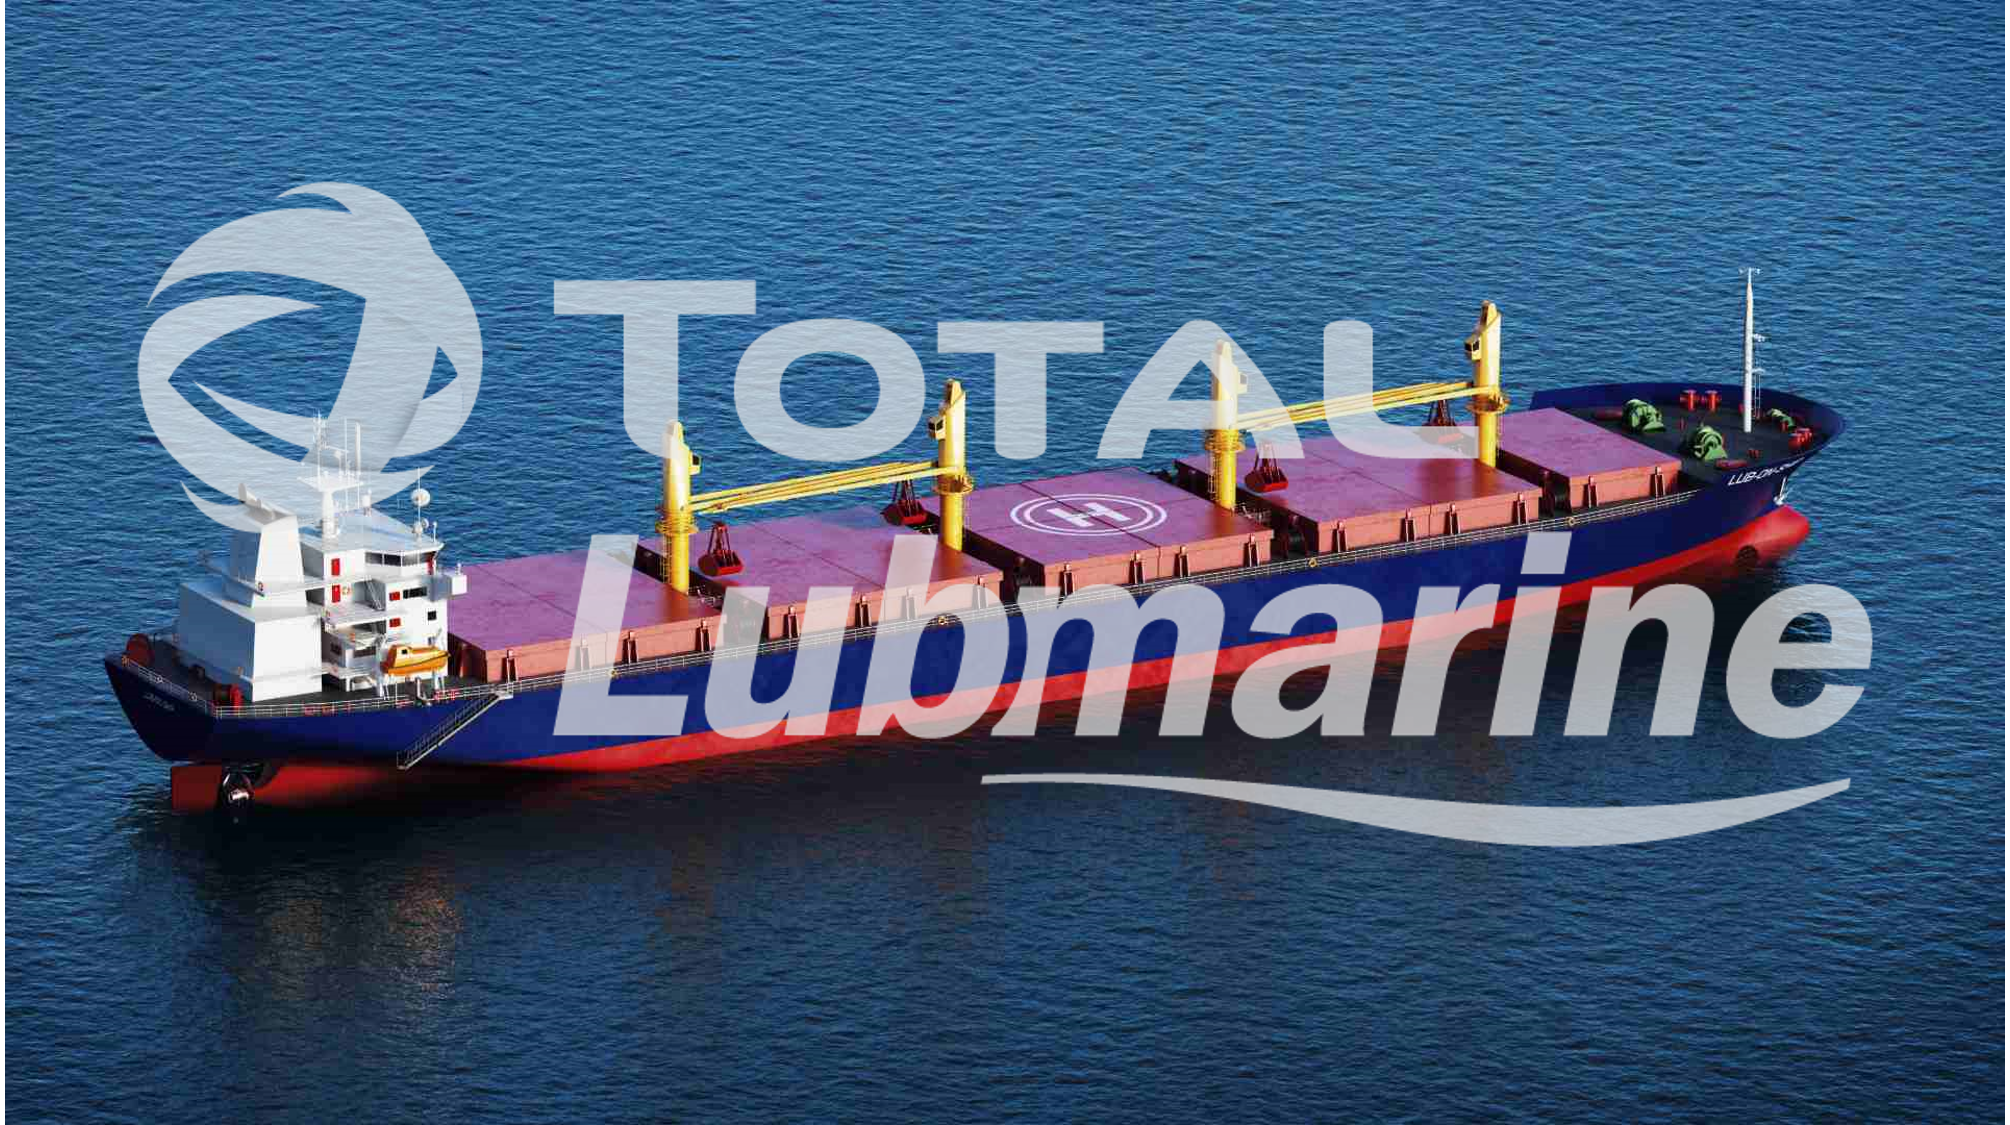 Global ship operator COSCO Shipping, which operates more than 1,000 vessels globally, has selected Lubmarine as its lubricant partner to supply its eight brand new bulk carriers over the next 3 years.